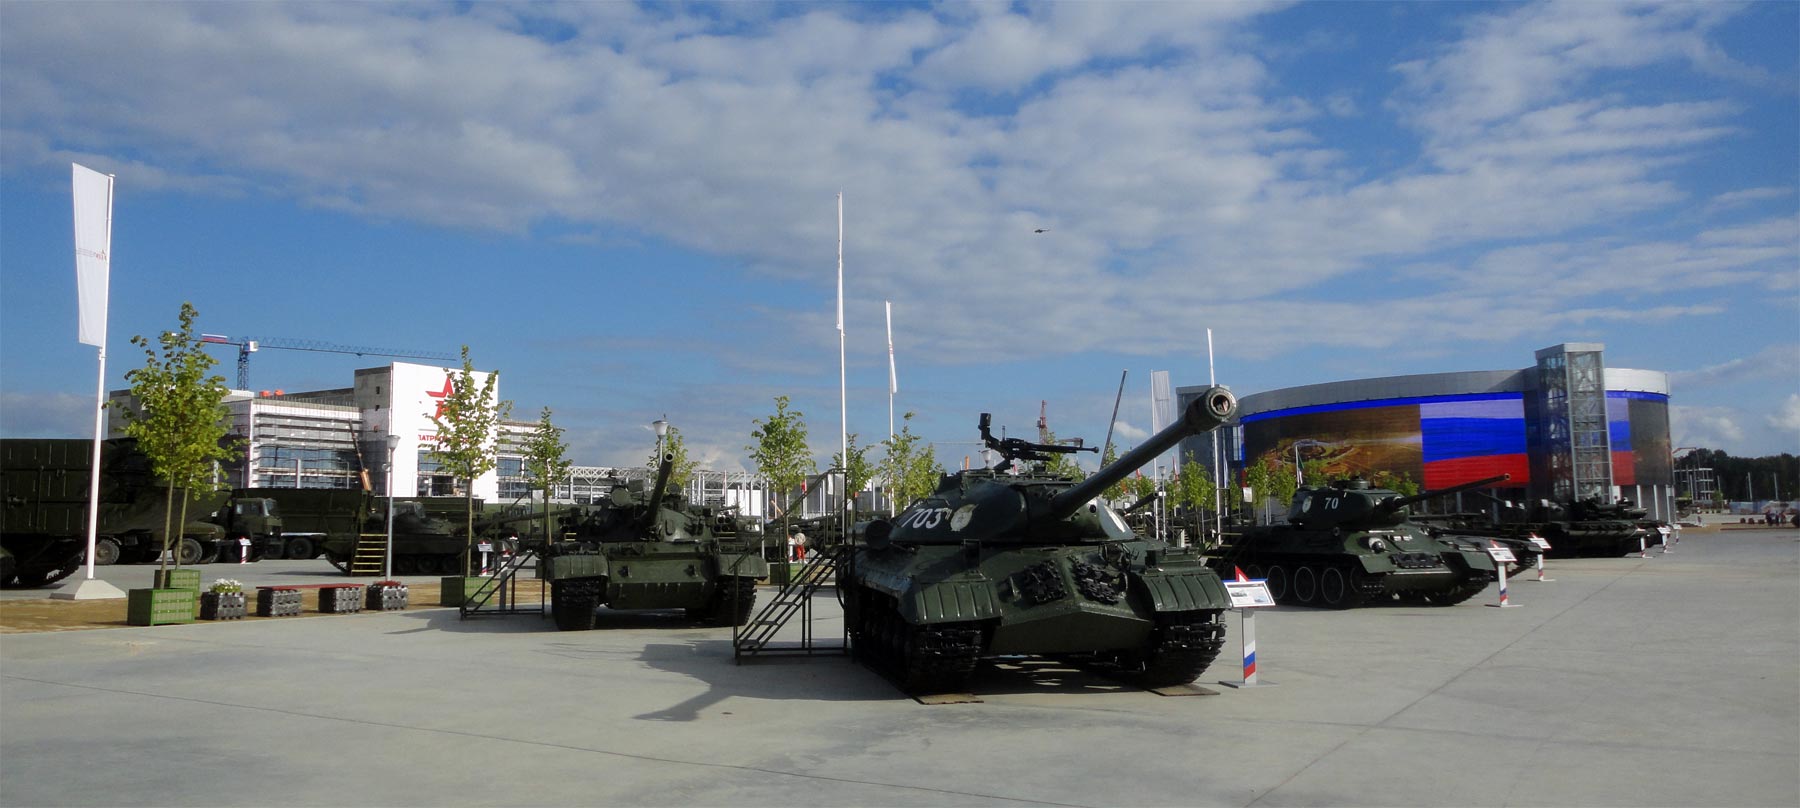 Patriot park, armored vehicles outdoor exhibition